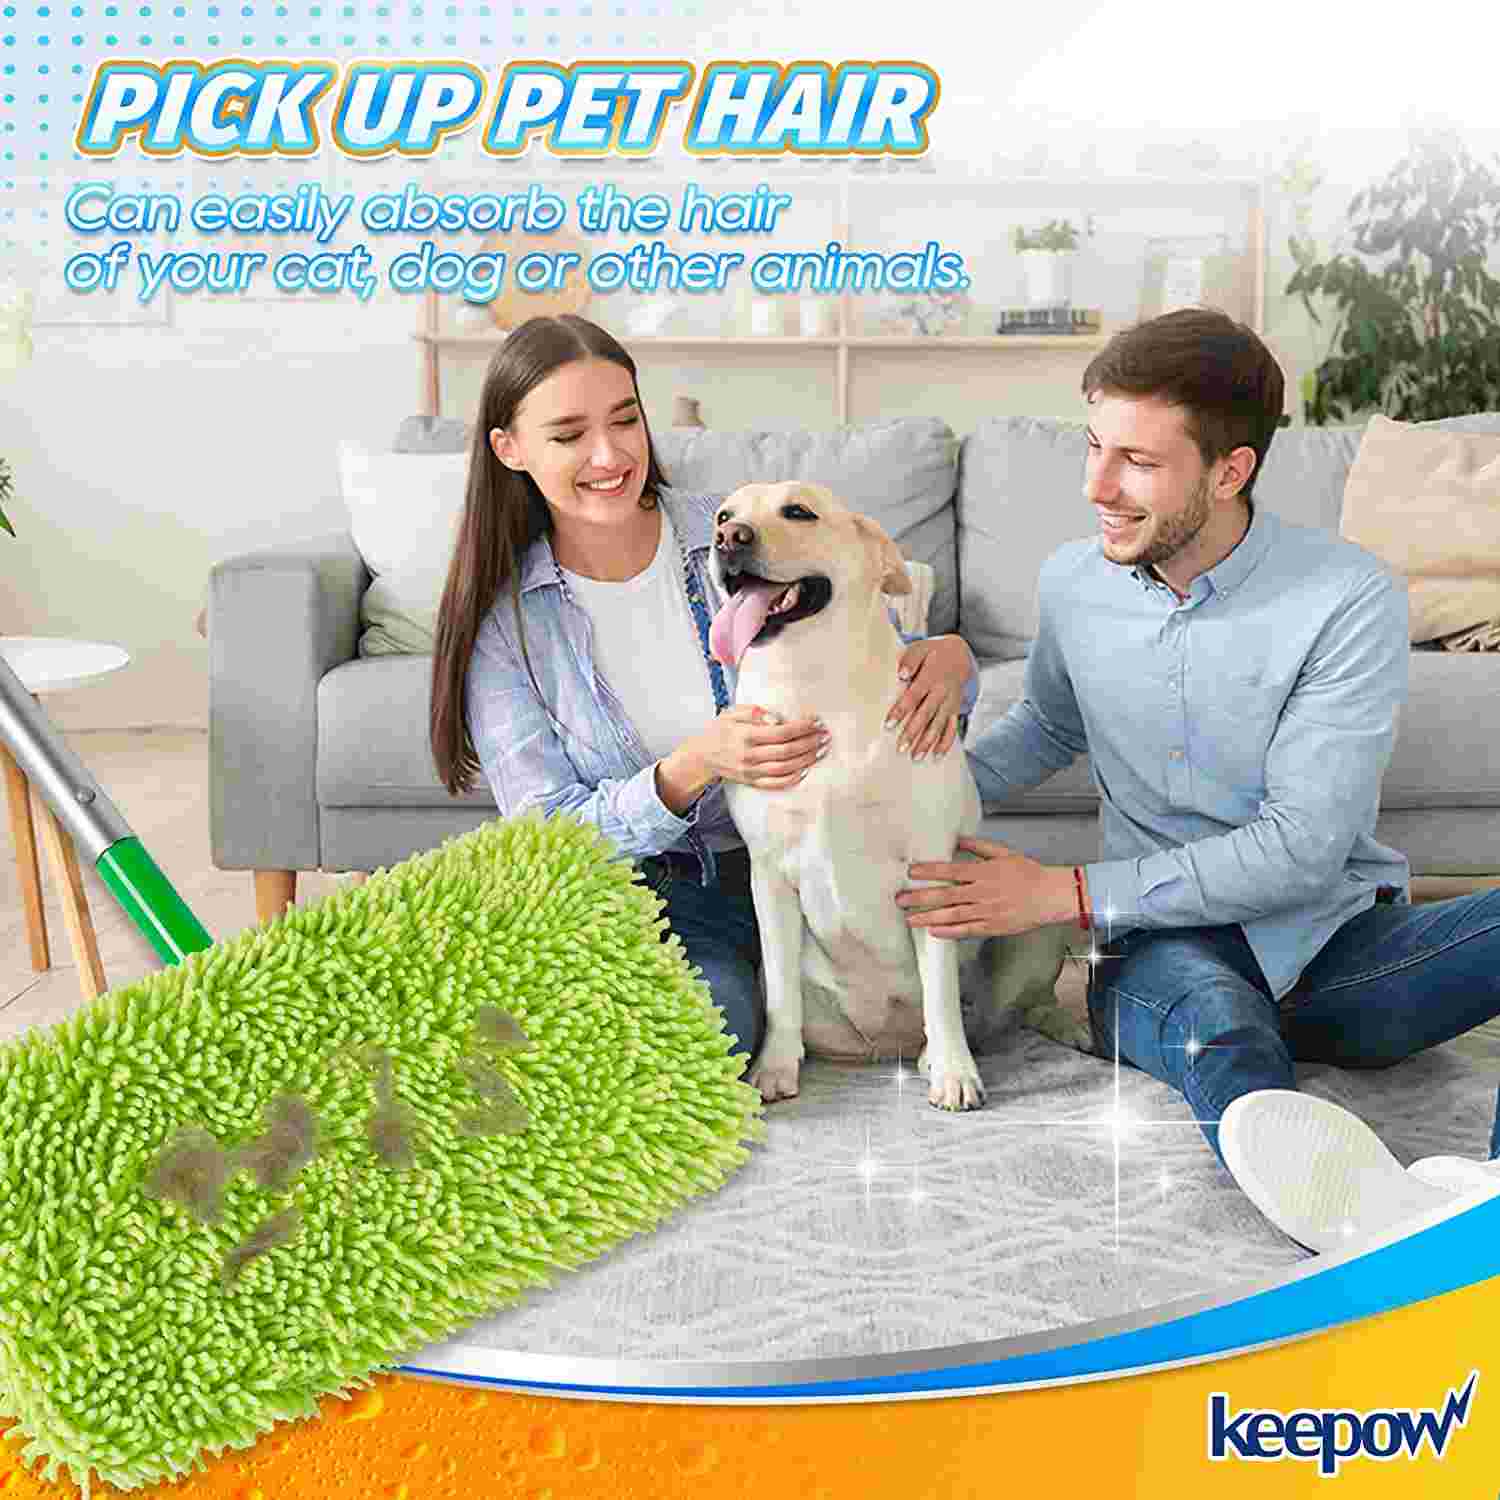 KEEPOW Dry Sweeping/Wet Mopping Cloths for Swiffer Sweeper, Reusable & Washable Microfiber Mop Pads Refills for Hard-Surface/Hardwood Floor Cleaning, 6 Pack 